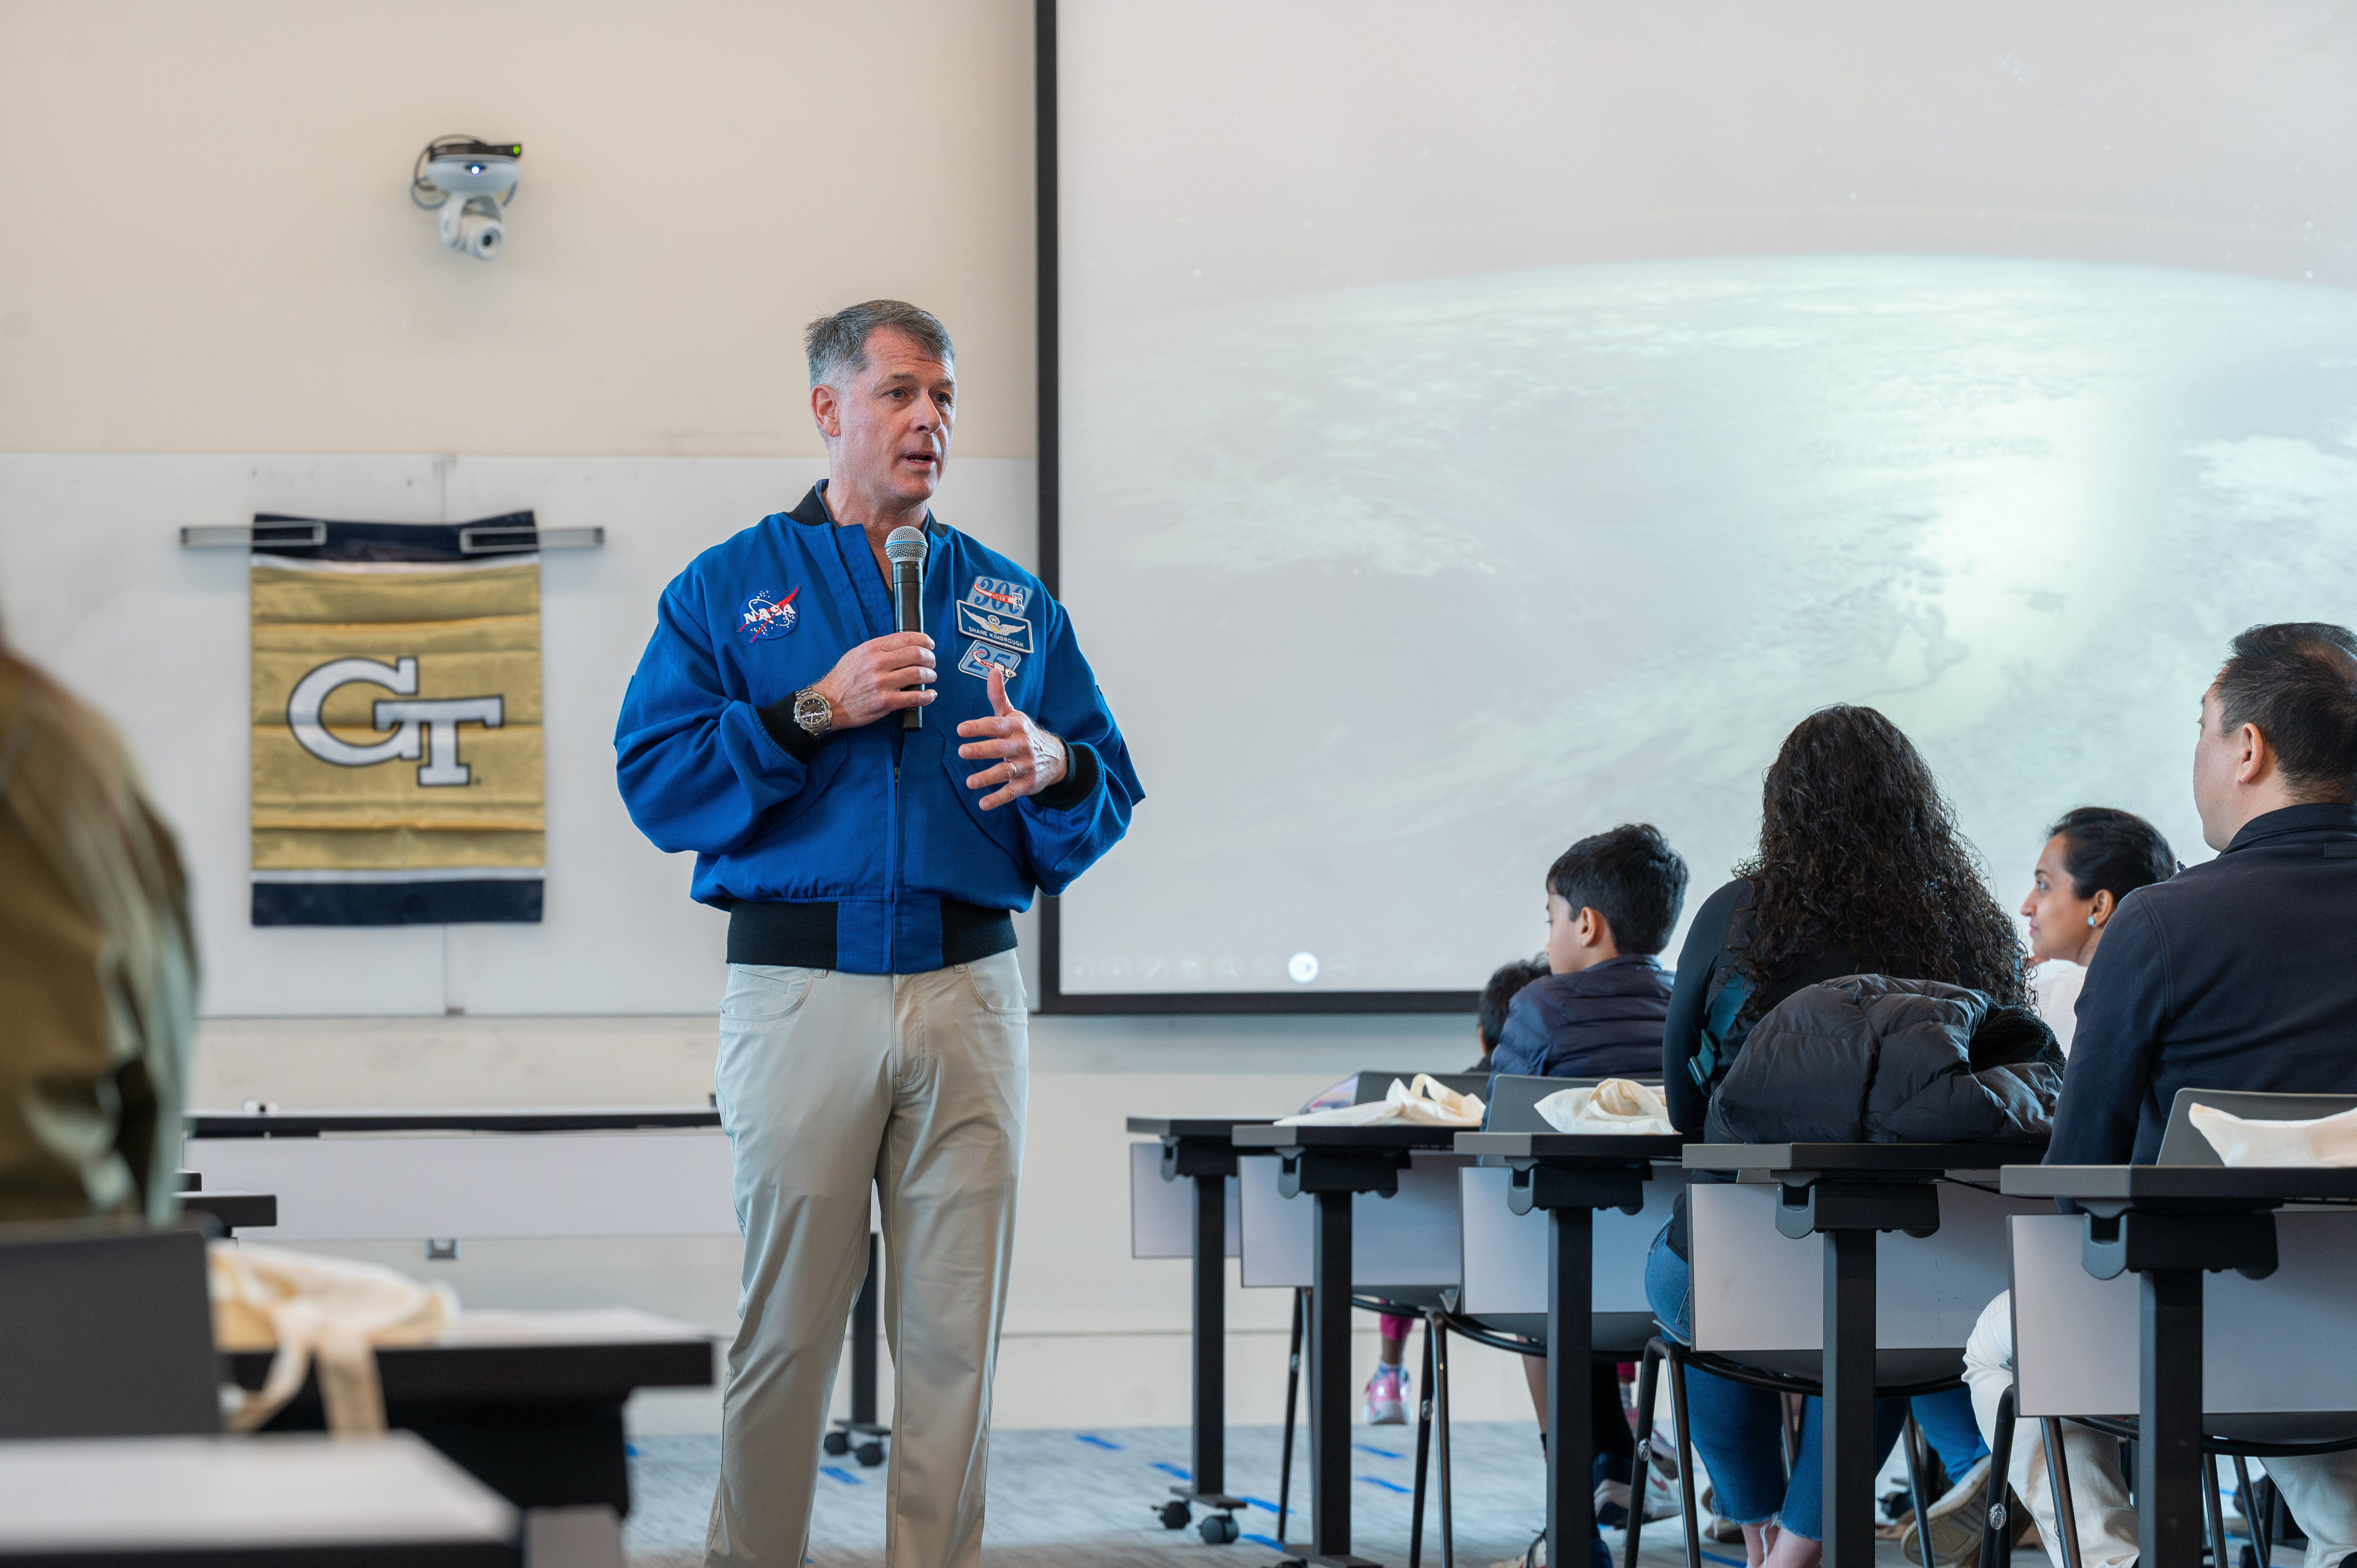 Former astronaut and Tech Alumnus Shane Kimbrough described what it was like to live and work in space to a packed crowd at Science and Engineering Day. (Credit: Joya Chapman)